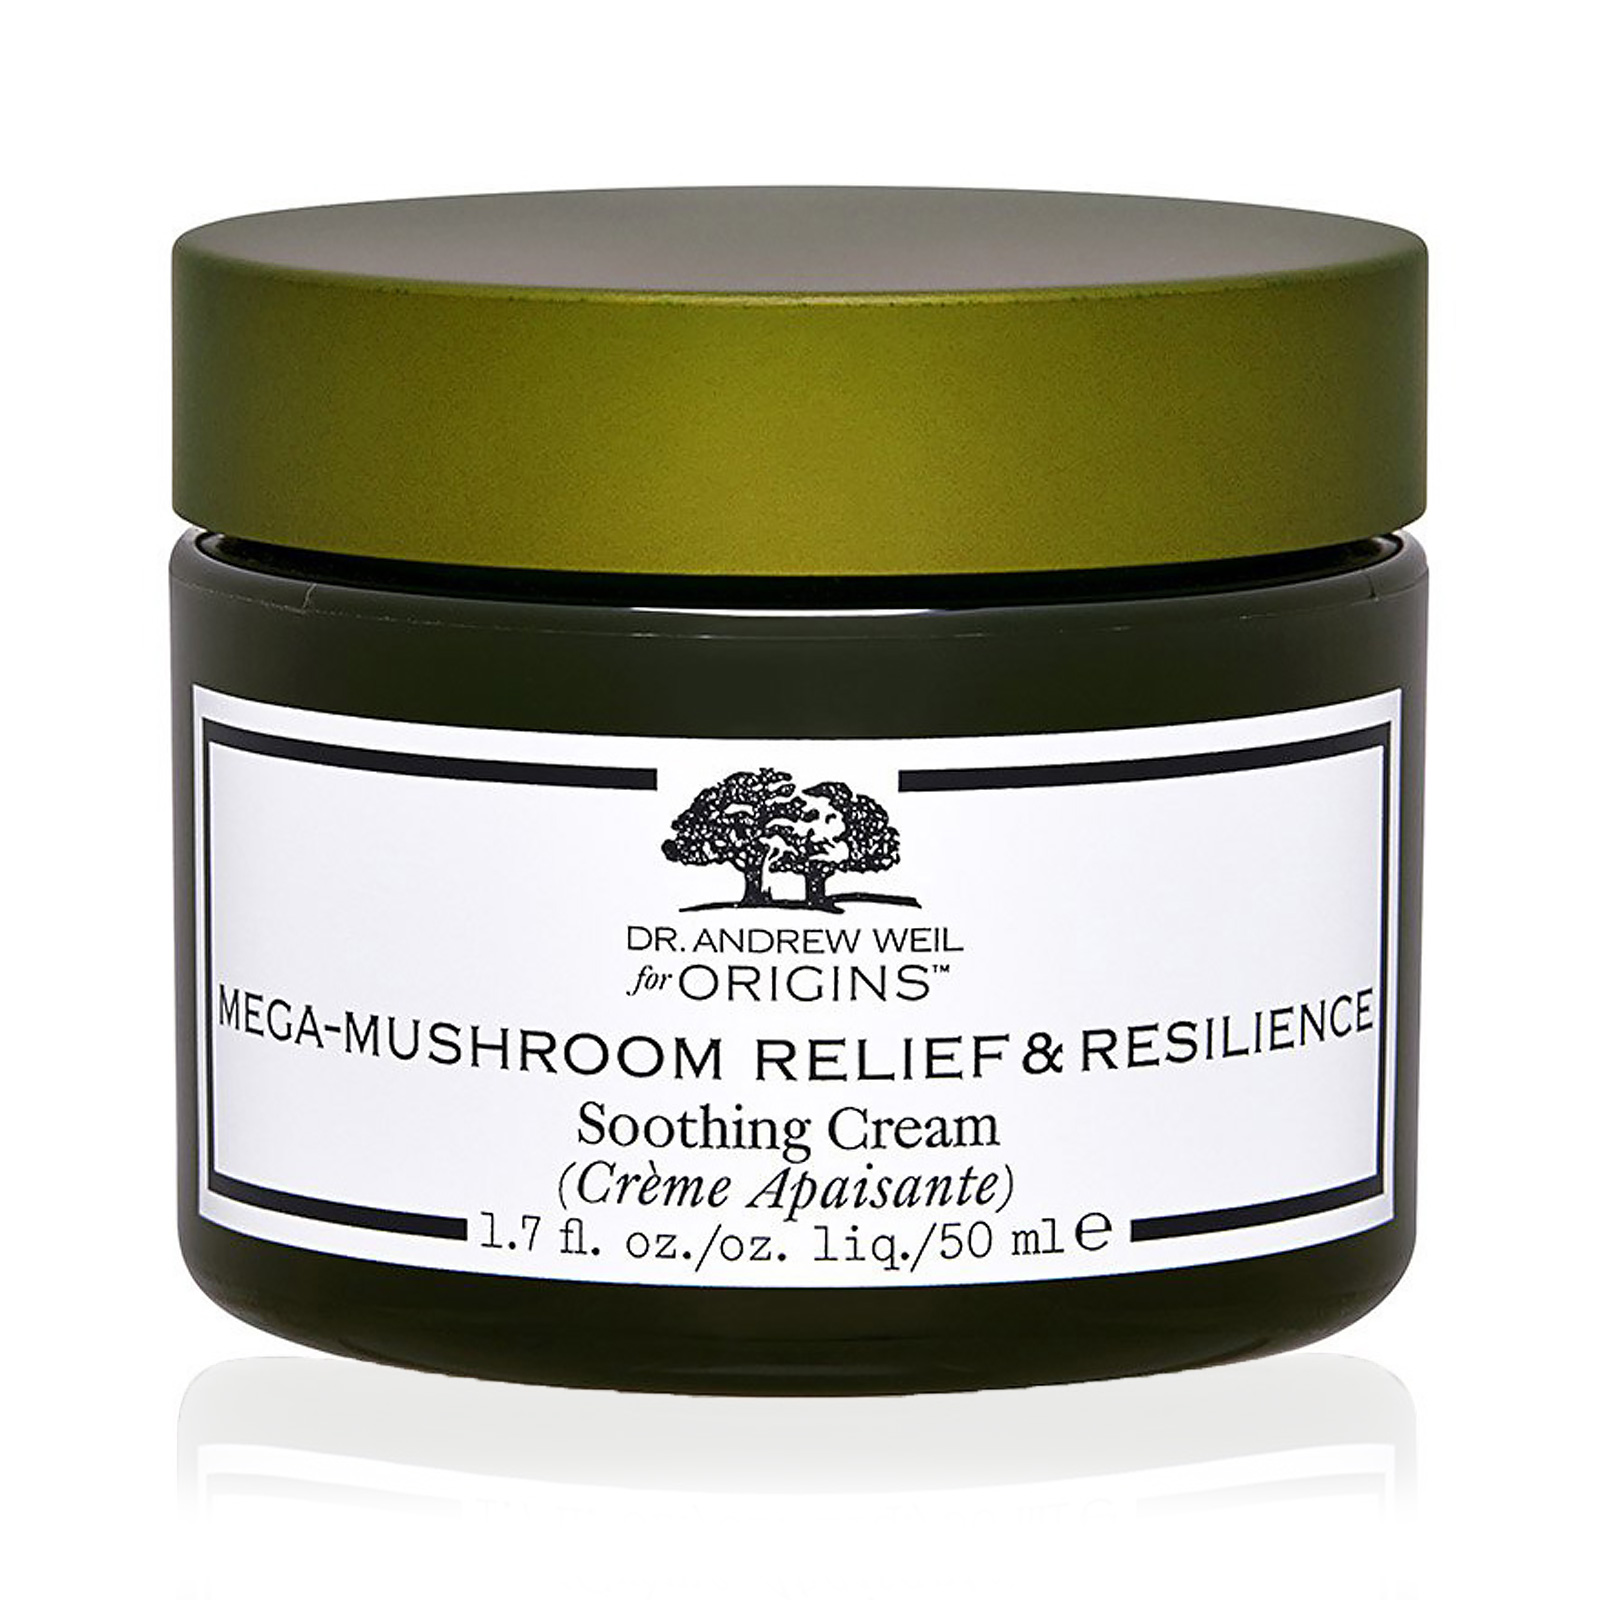 Dr. Andrew Weil Mega-Mushroom Relief & Resilience Soothing Cream